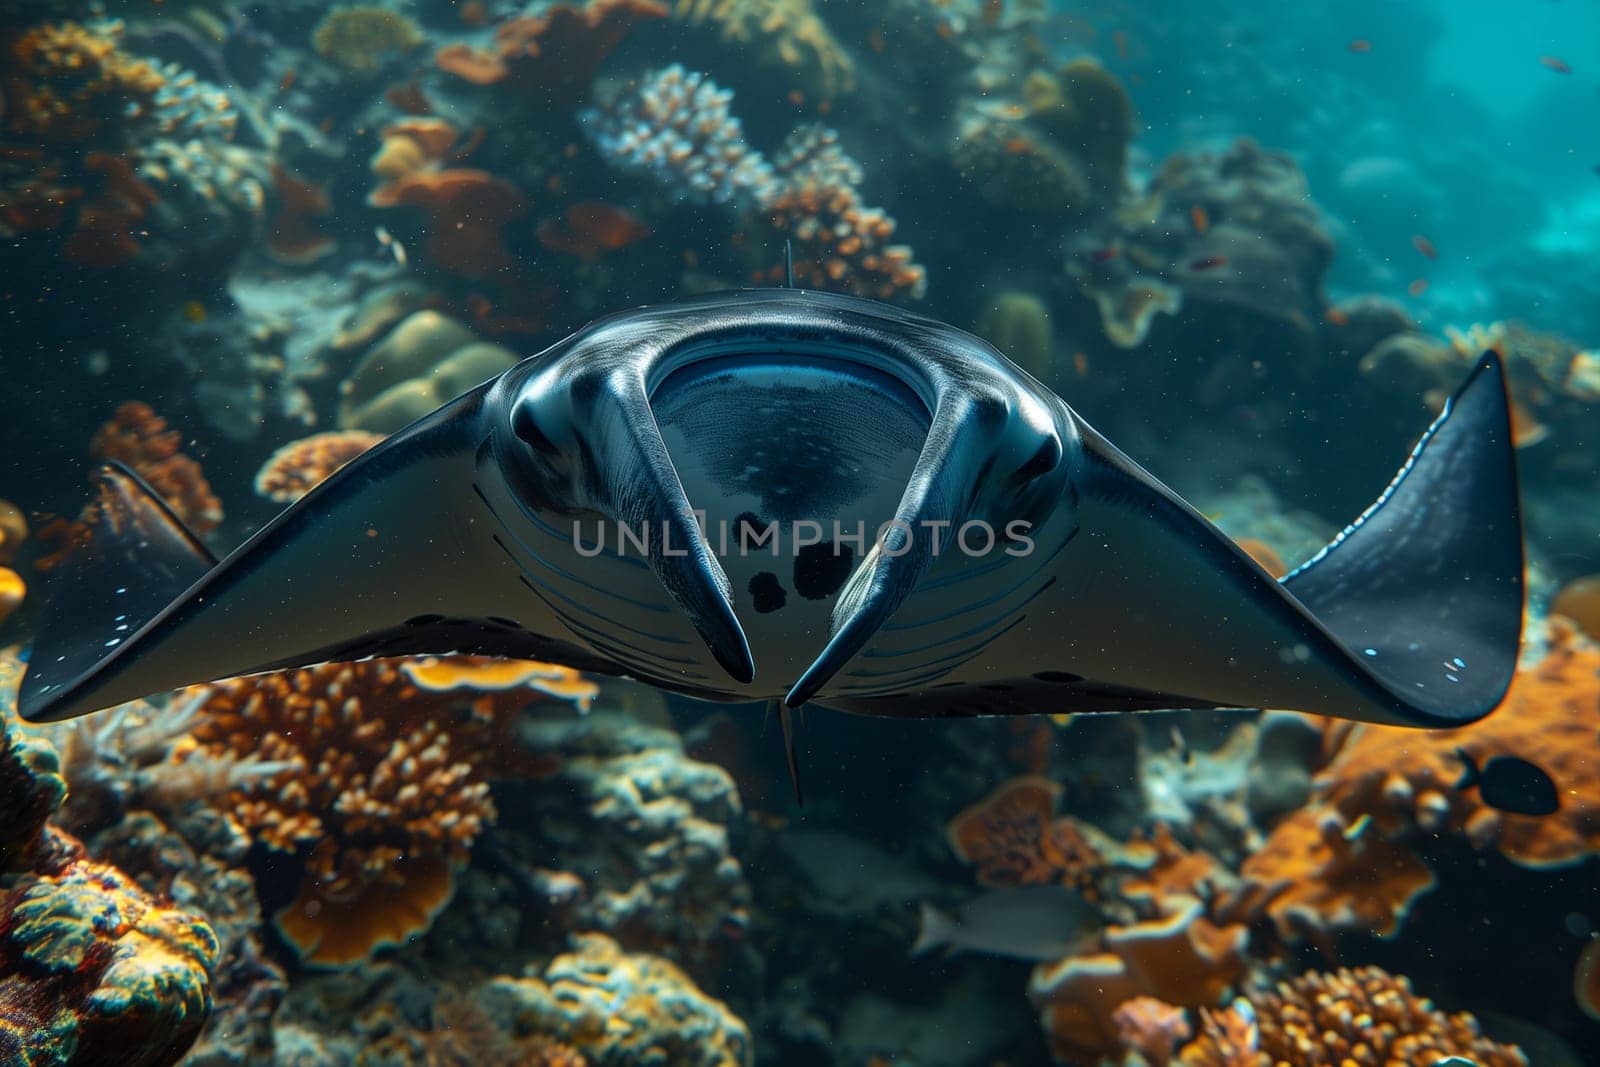 Manta ray swimming in the ocean in French Polynesia.